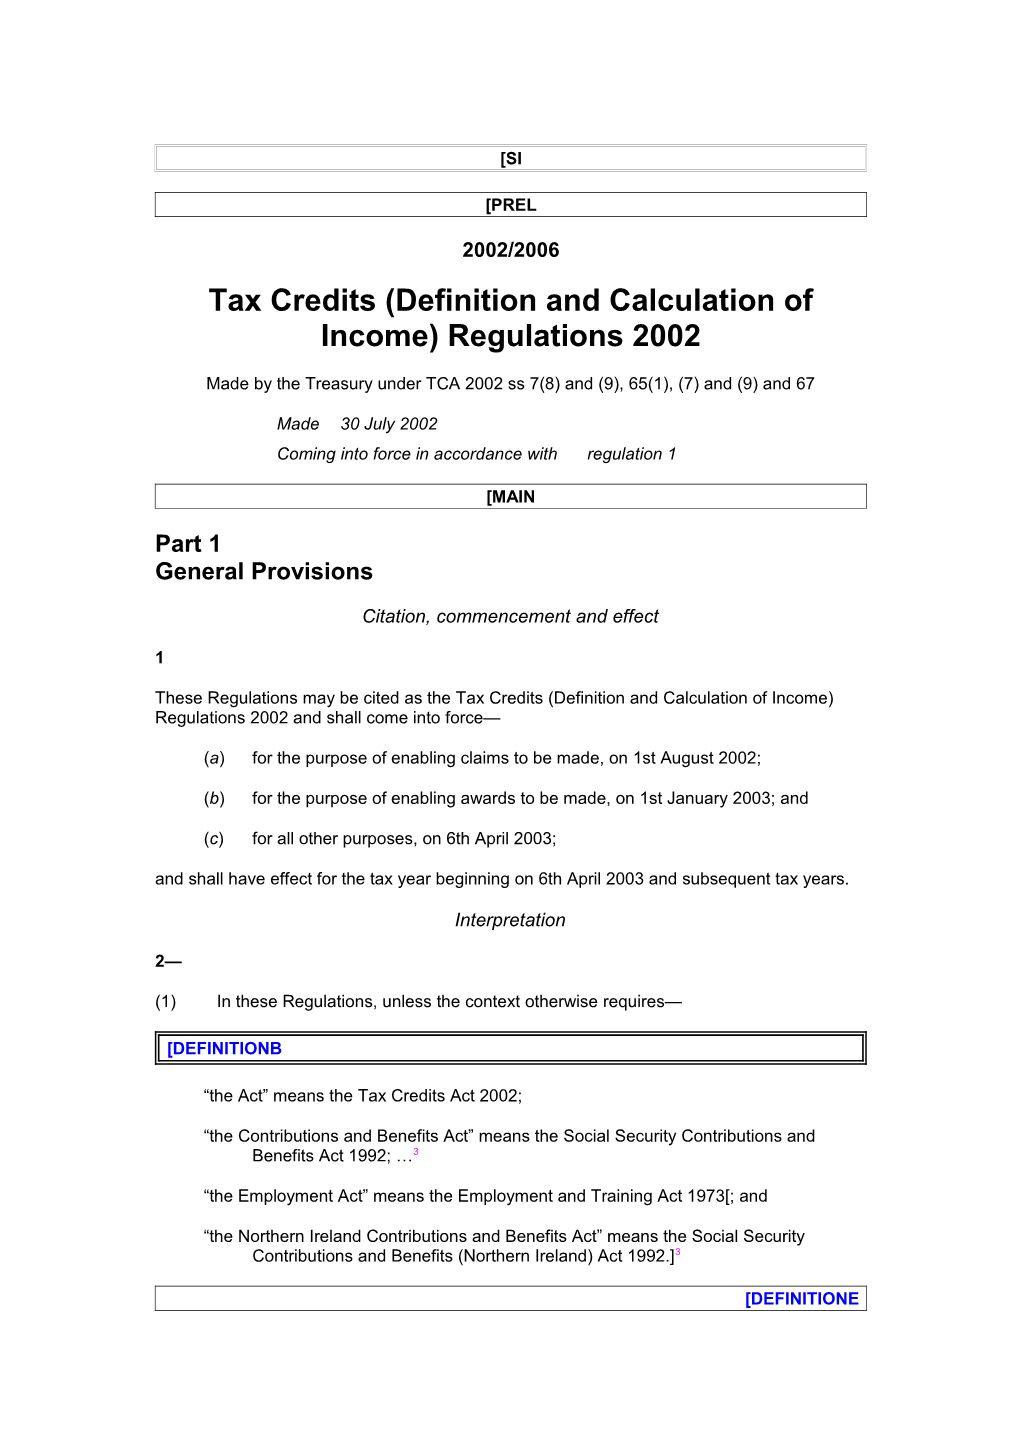 Tax Credits (Definition and Calculation of Income) Regulations 2002